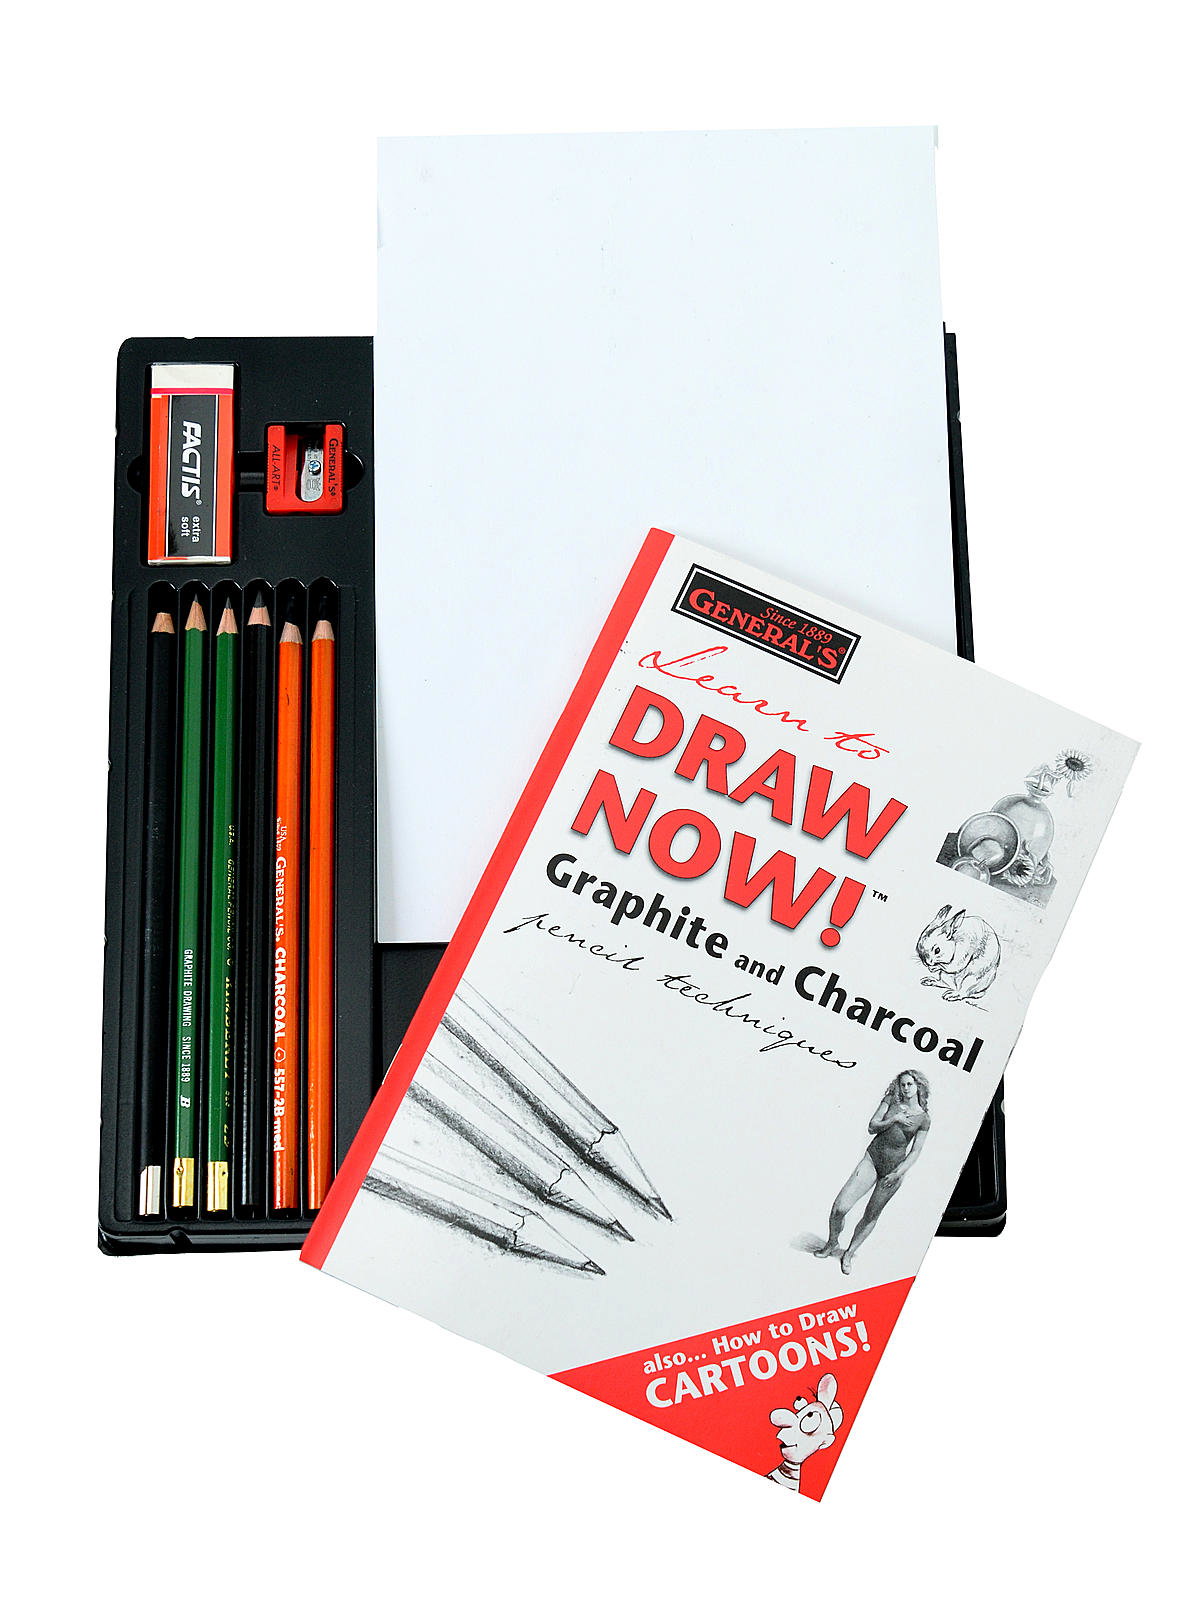 General's How To Draw Cartoons Kit